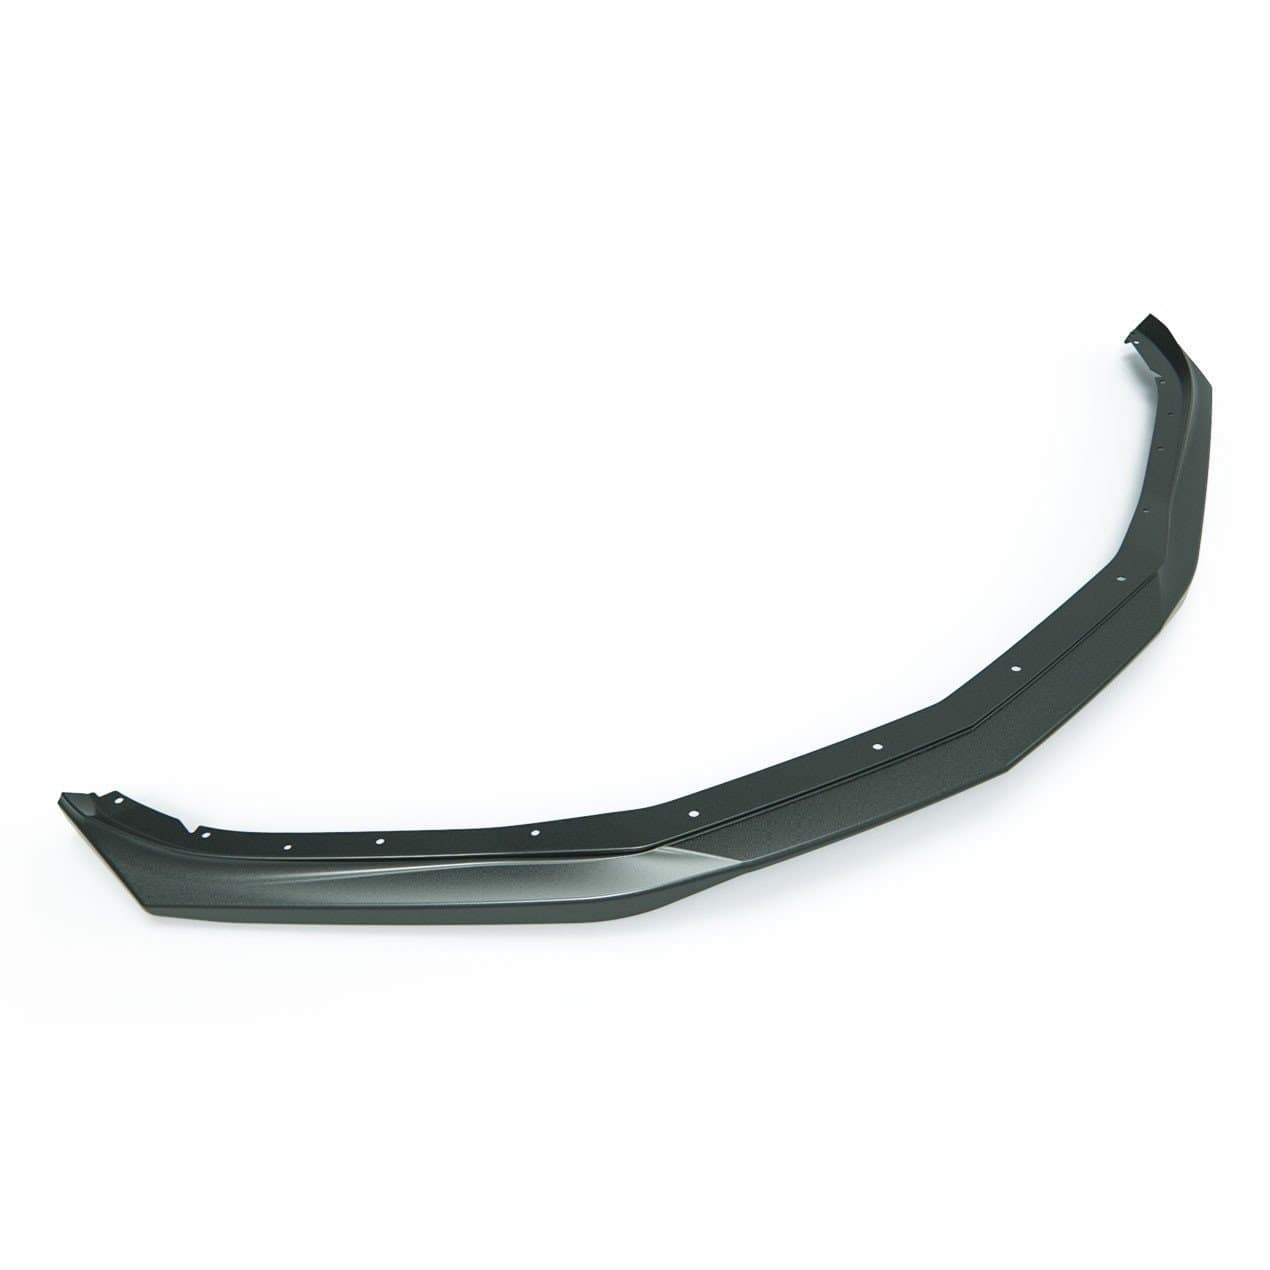 ACS Composite T7 Front Splitter in Primer with No Endcaps for Camaro 2016+ [48-4-007]PRM - Enhance aerodynamics and style.